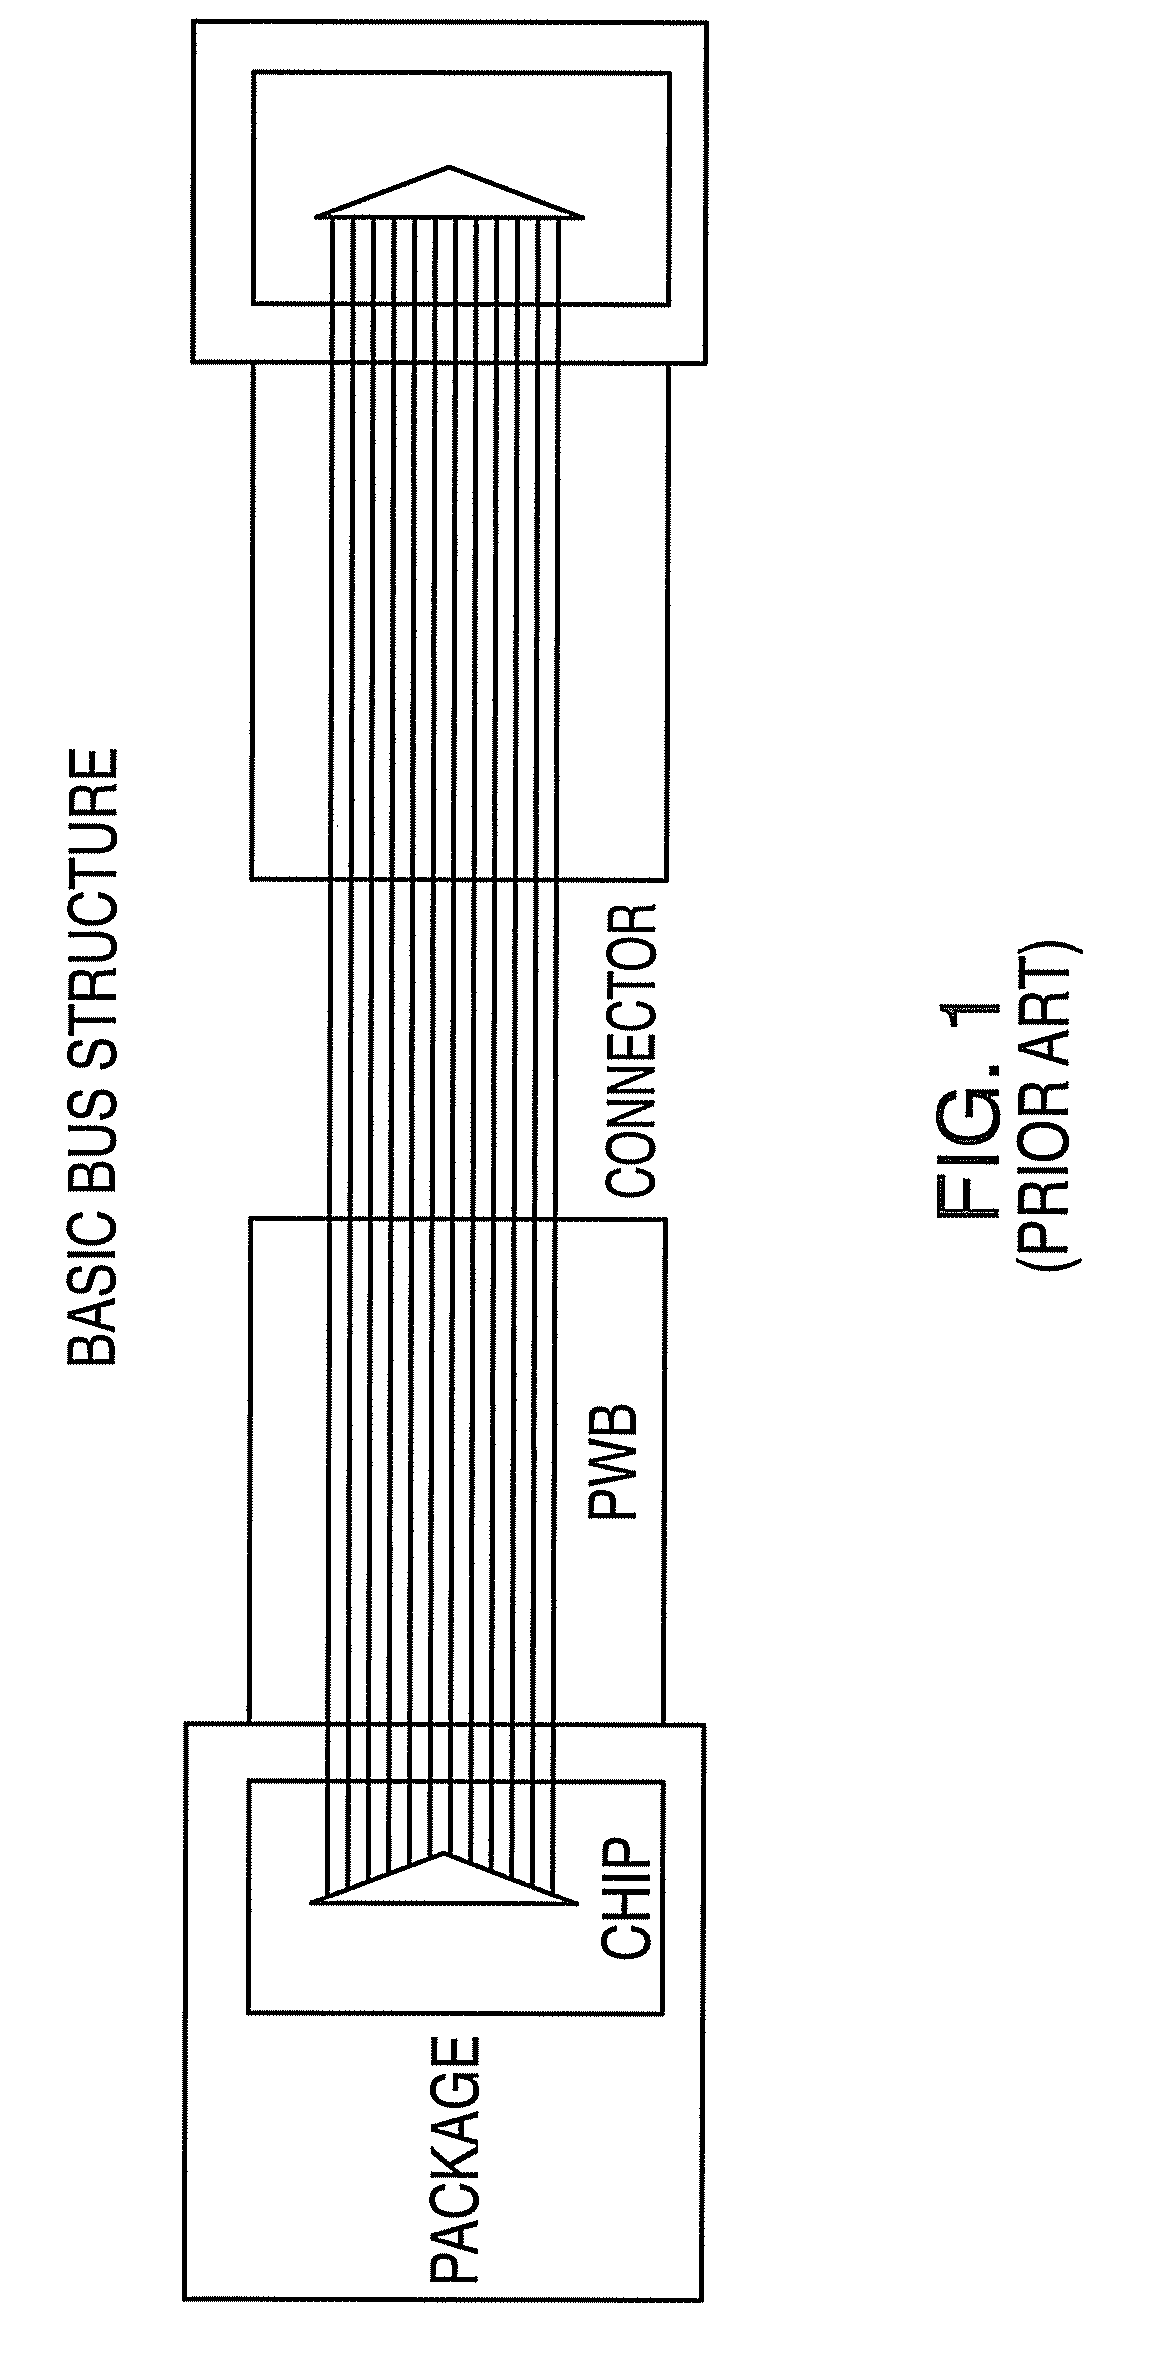 Systems, methods, and computer program products for providing a two-bit symbol bus error correcting code